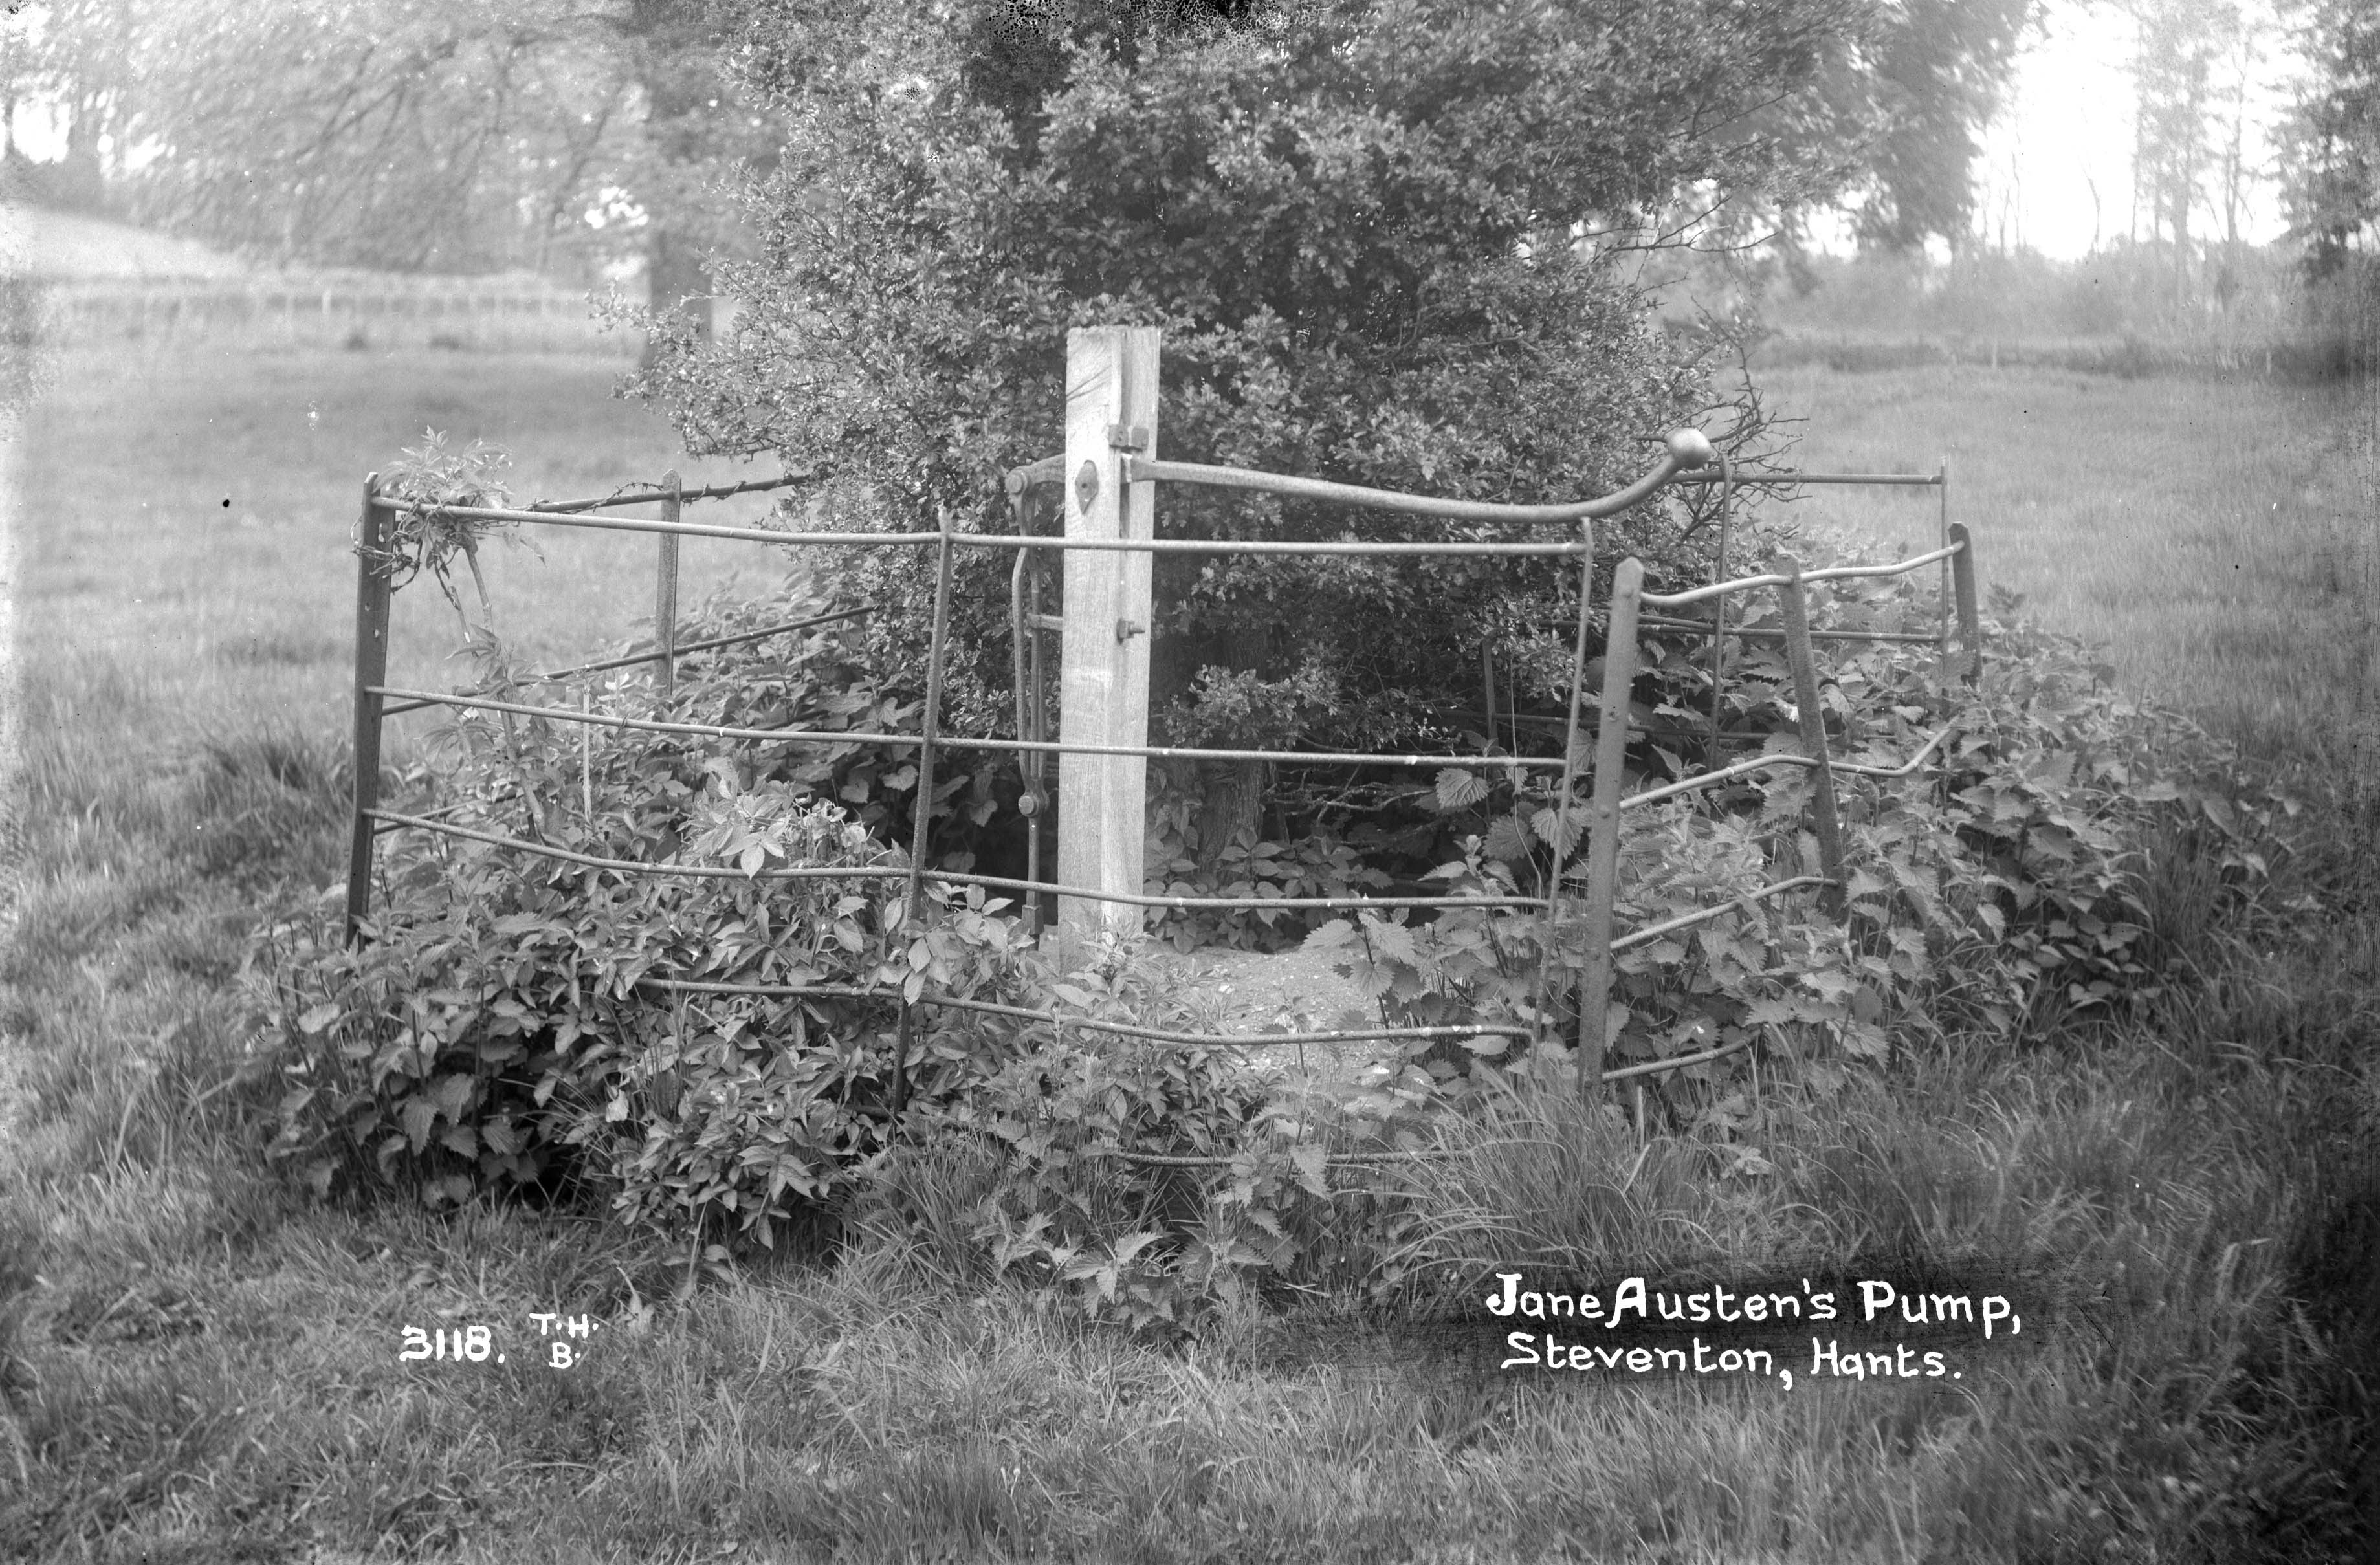 A black and white image. A pump is surrounded by a metal fence.